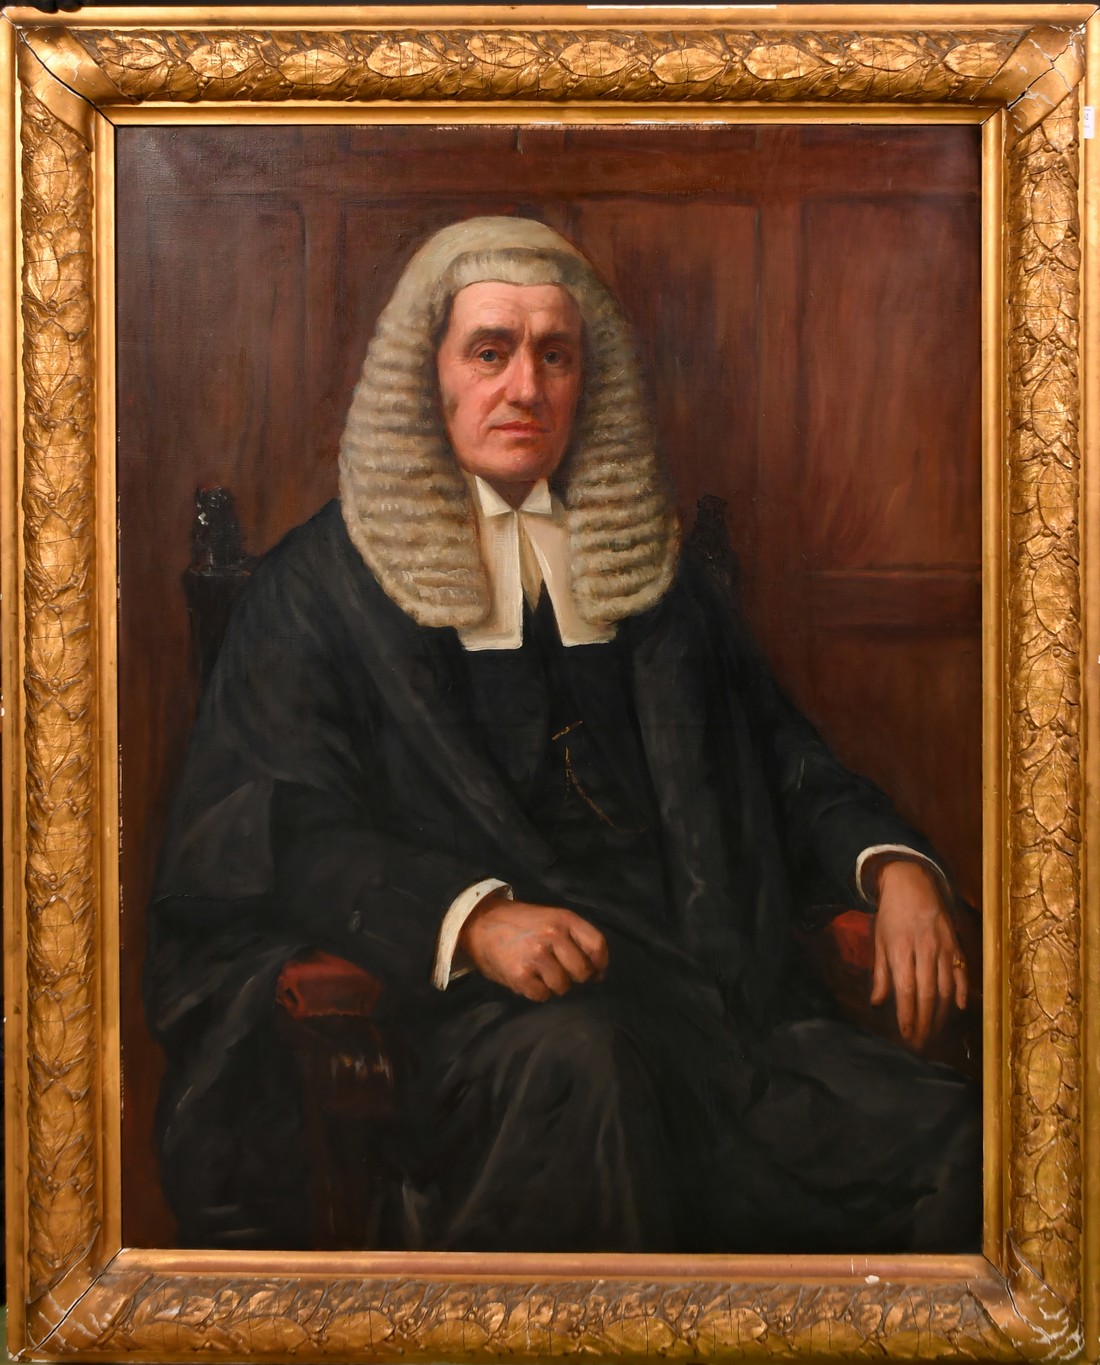 Charles Goldsborough Anderson (1865-1936), a portrait of Judge Shand, thought to be Alexander Shand, - Image 2 of 5